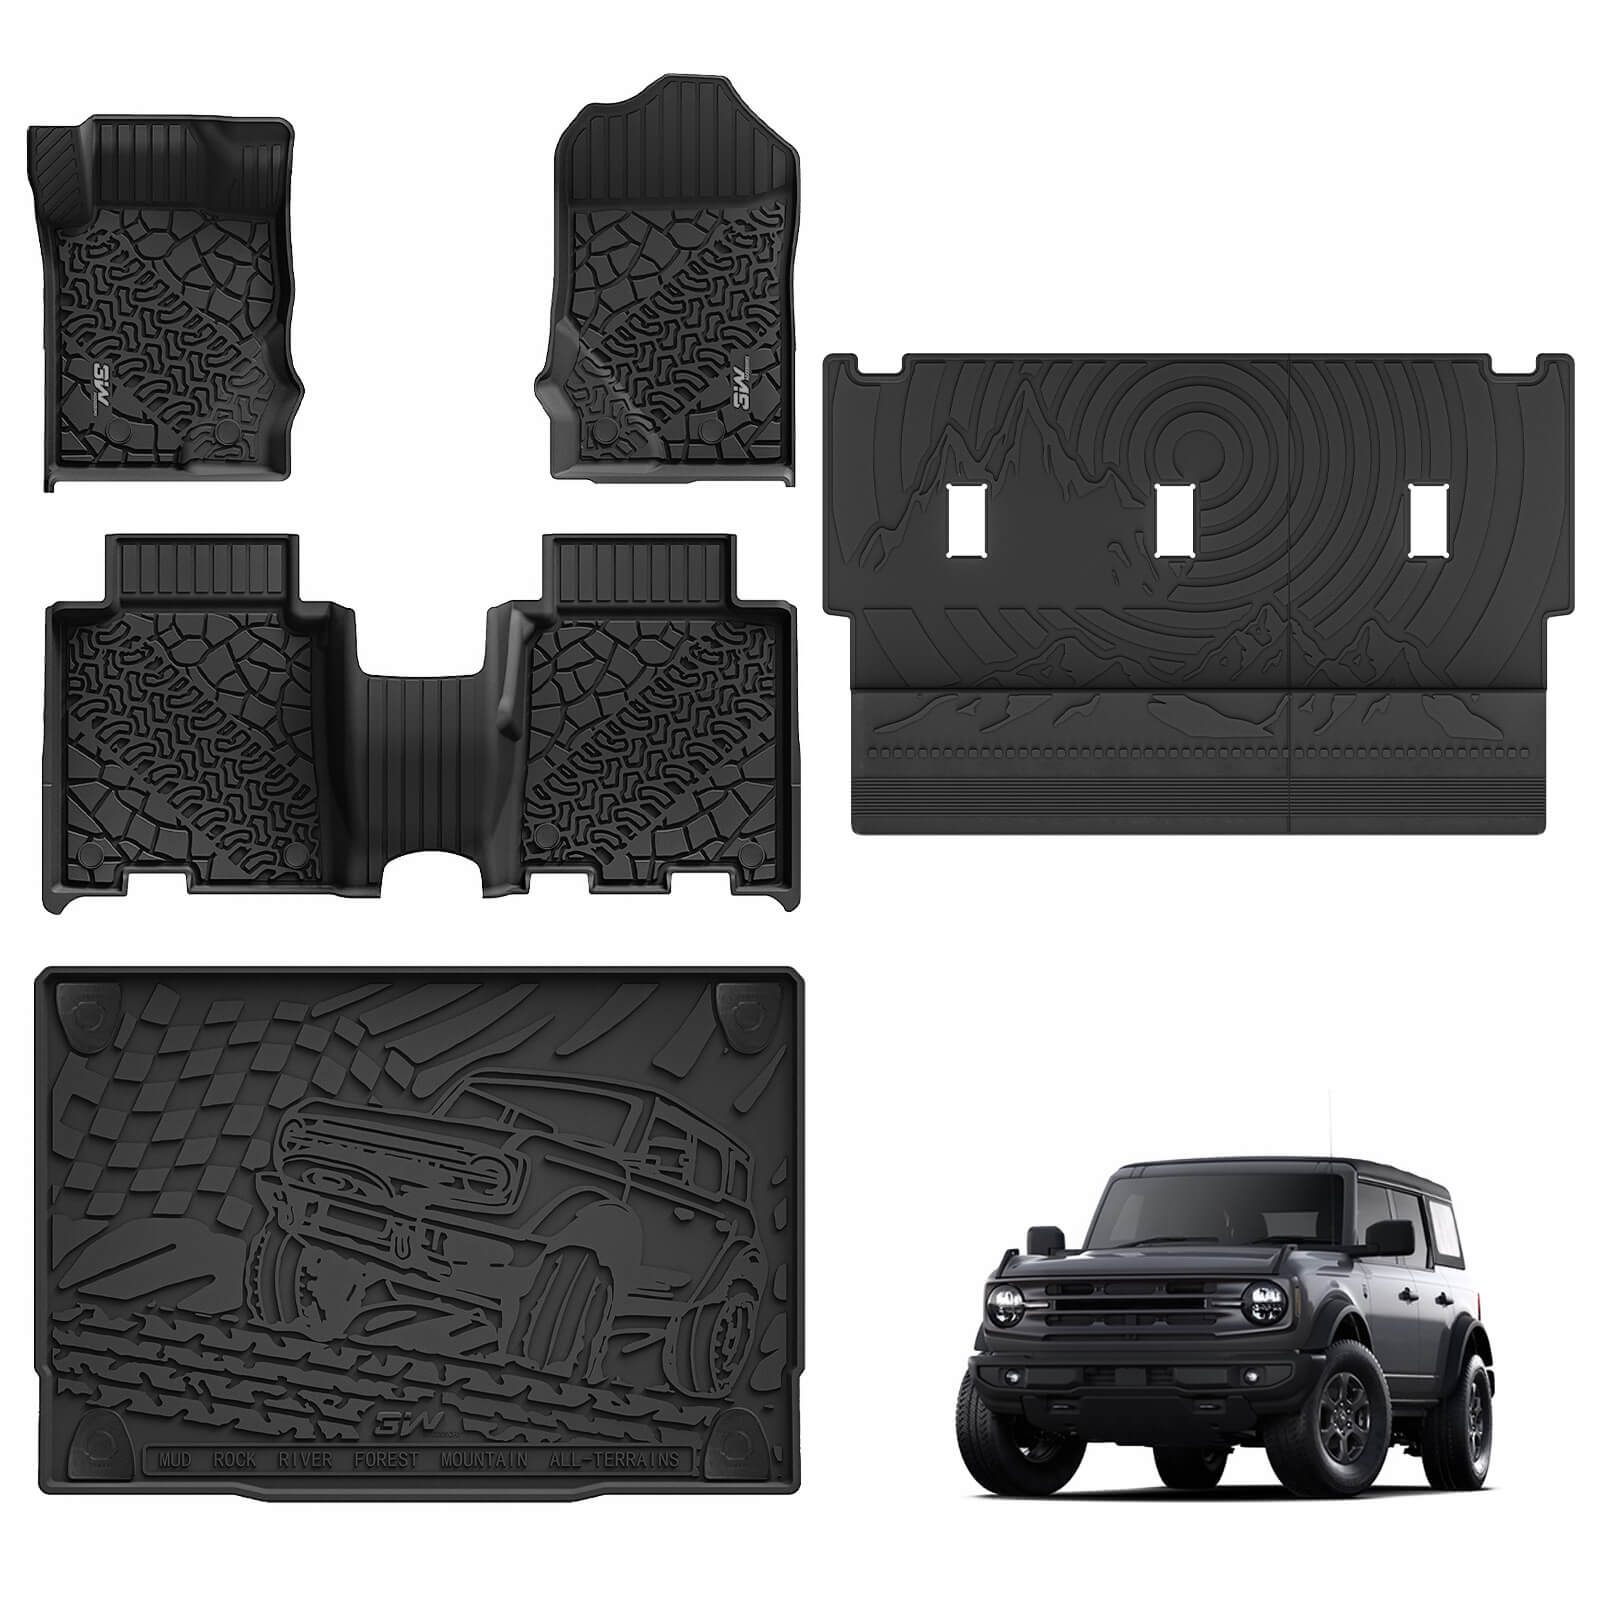 3W Ford Bronco 4-Door 2021-2024 Floor Mats / Trunk Mat TPE Material & All-Weather Protection Vehicles & Parts 3Wliners 2021-2024 Bronco 2021-2024 1st&2nd Row +Trunk Mat+Back Seat Cover